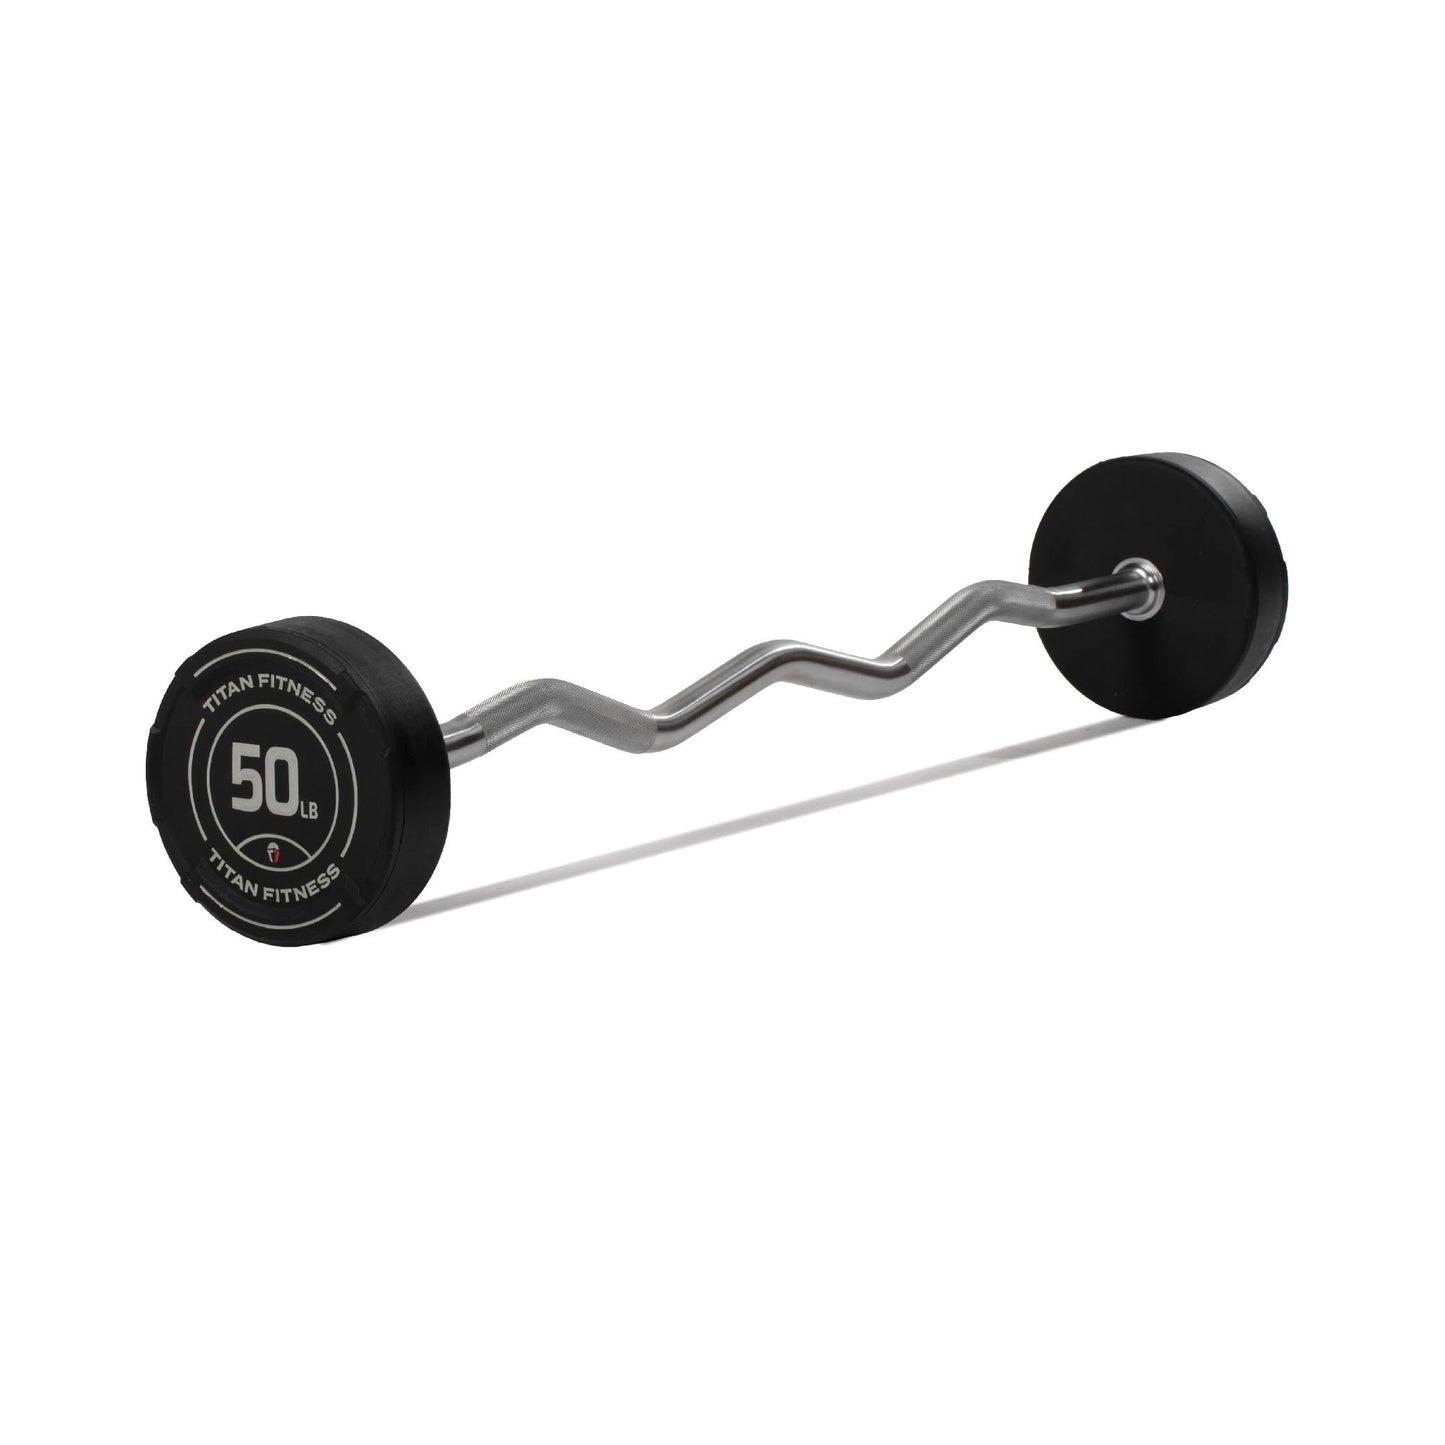 50 LB EZ Curl Fixed Rubber Barbell - view 1